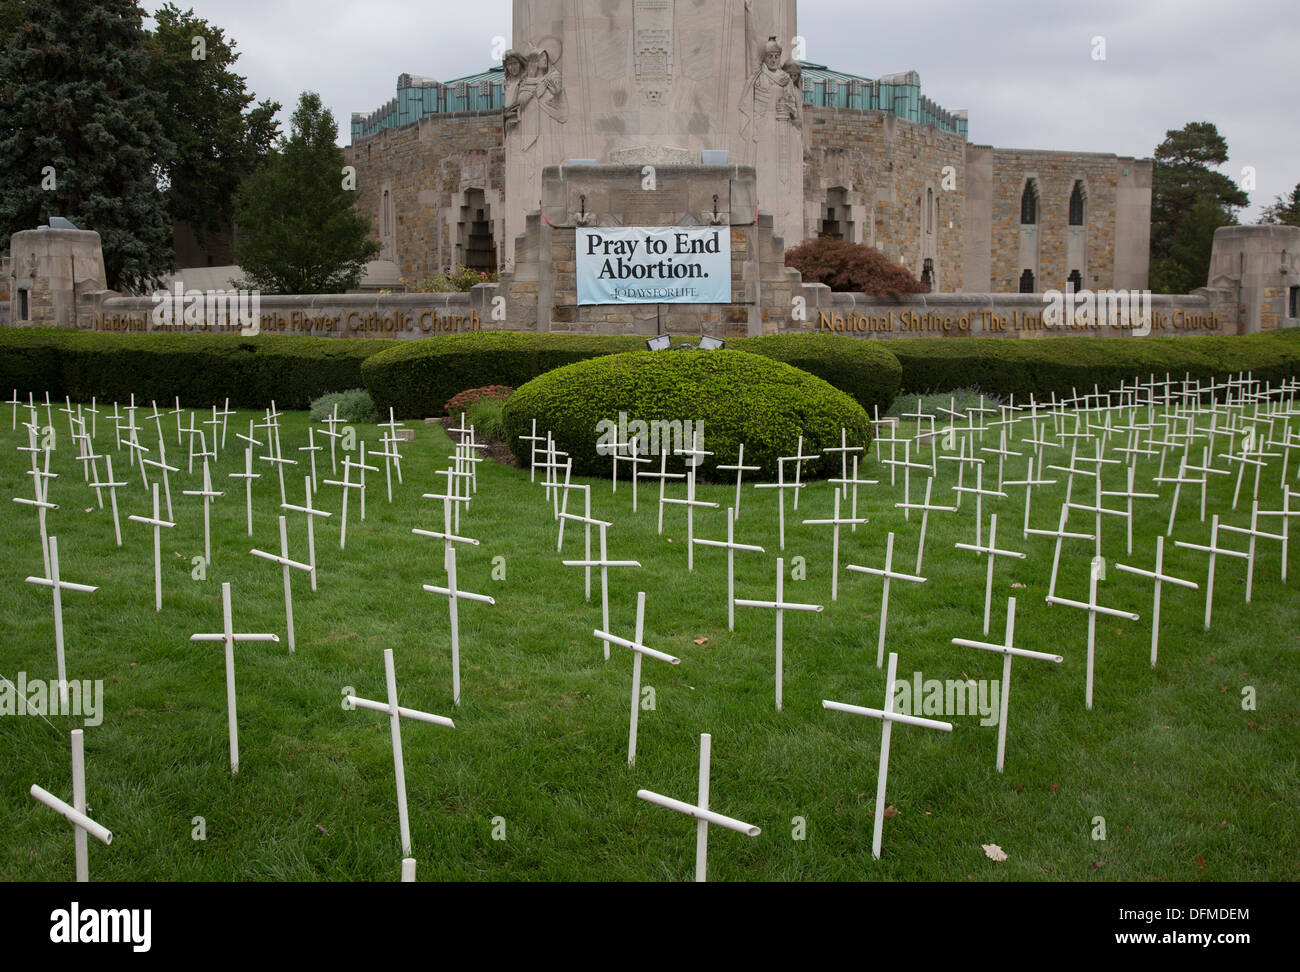 Crosses on the lawn of the National Shrine of the Little Flower Catholic Church are part of the church's anti-abortion campaign. Stock Photo